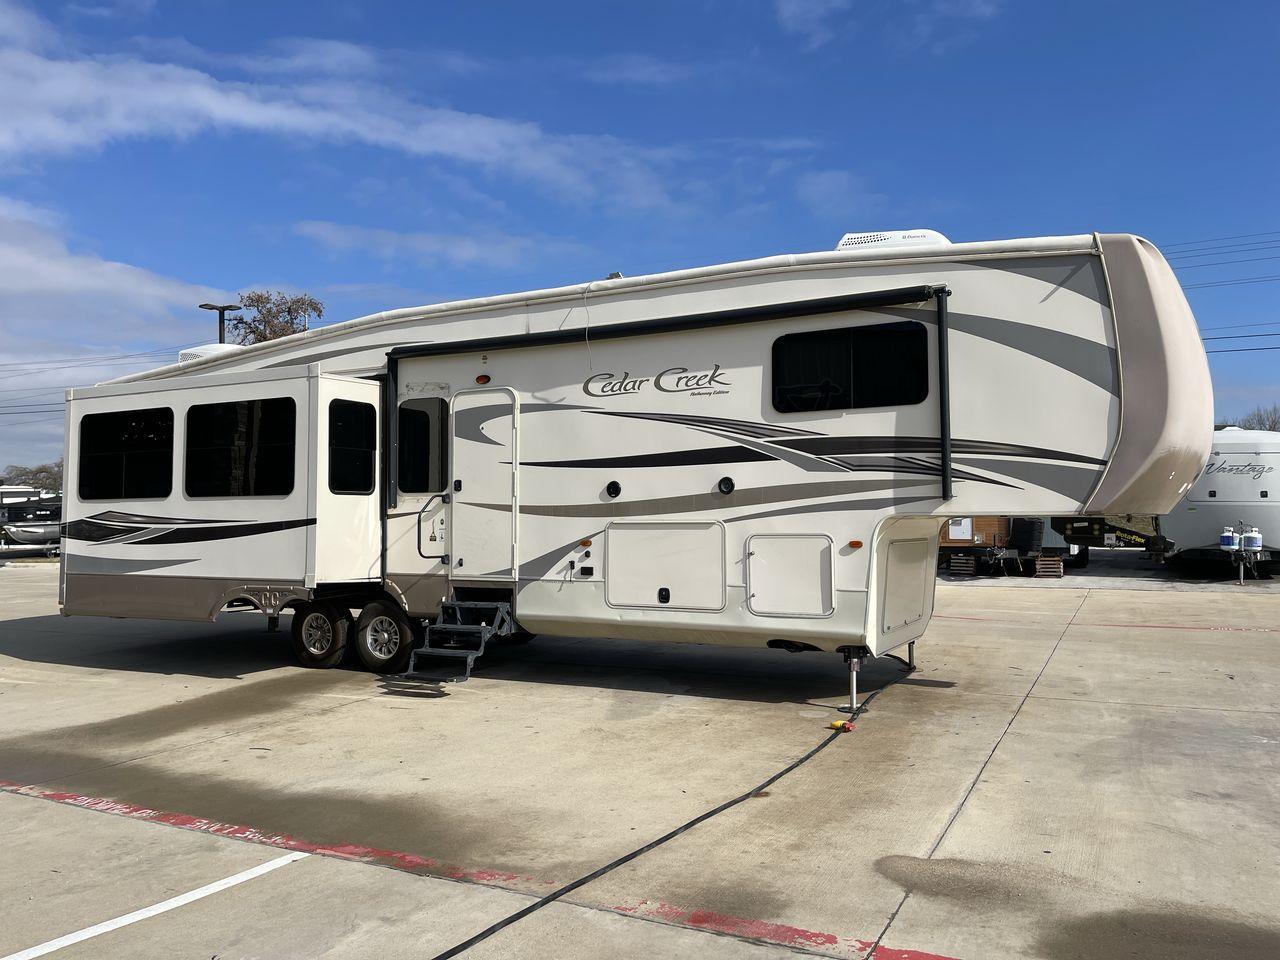 2016 TAN FOREST RIVER CEDAR CREEK 36CKTS (4X4FCRM27GS) , Length: 39.83 ft. | Dry Weight: 12,670 lbs. | Gross Weight: 16,407 lbs. | Slides: 3 transmission, located at 4319 N Main Street, Cleburne, TX, 76033, (817) 221-0660, 32.435829, -97.384178 - With a length of 39.83 feet and a dry weight of 12,670 pounds, the 2016 Forest River Cedar Creek 36CKTS Fifth Wheel offers comfort and space on the road. This fifth wheel is made to be comfortable and last a long time. The inside is nicely finished with high-quality materials, and the two opposing s - Photo #23